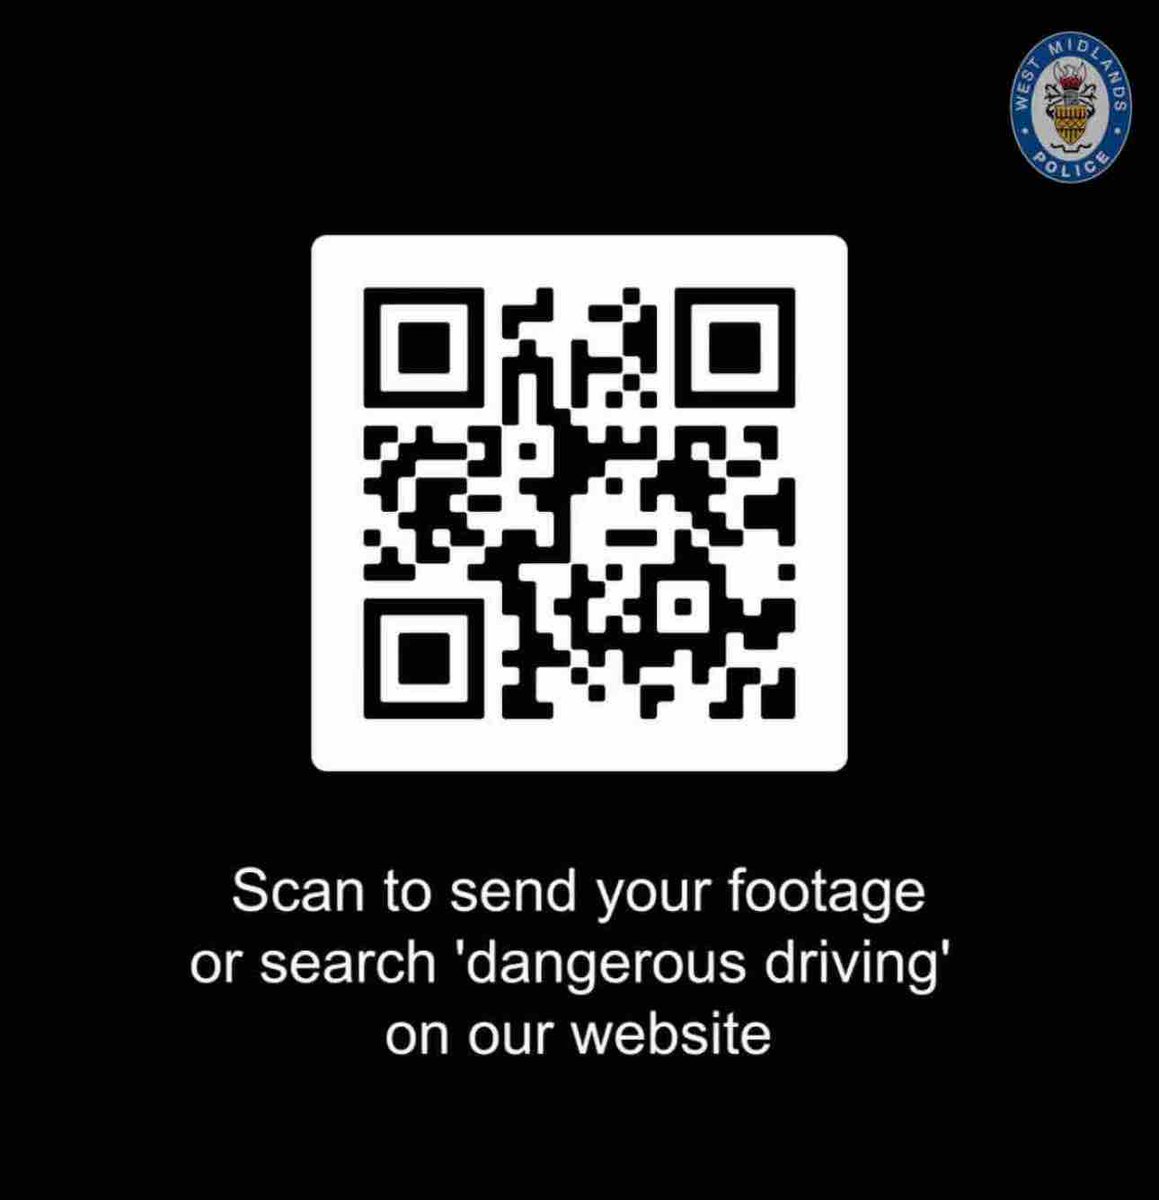 #RoadSafety - Operation Snap is working to make our roads safer with your help. To submit footage of driving offences please click the link below or scan the QR code. west-midlands.police.uk/bob-e/dangerou…